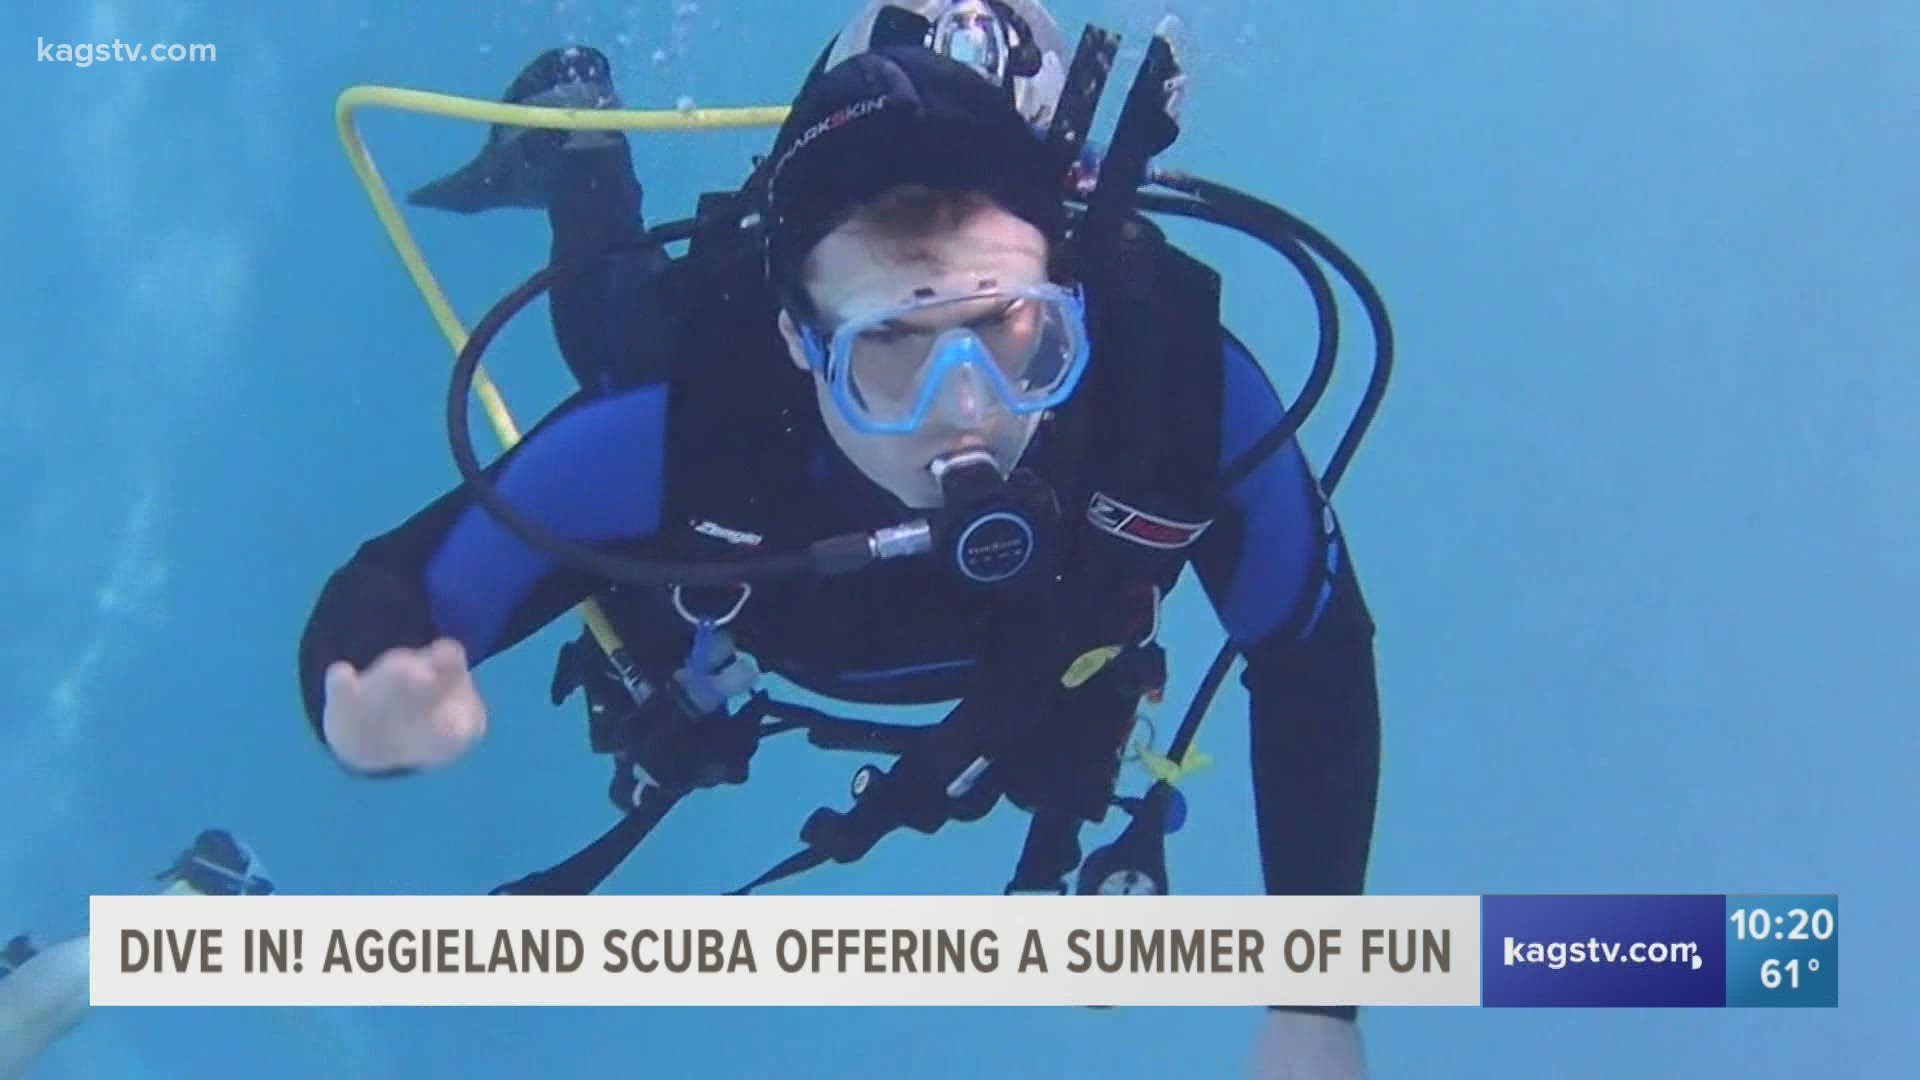 Aggieland Scuba certifies hundreds of scuba divers each year. They offer safe, socially distant fun courses to do locally.